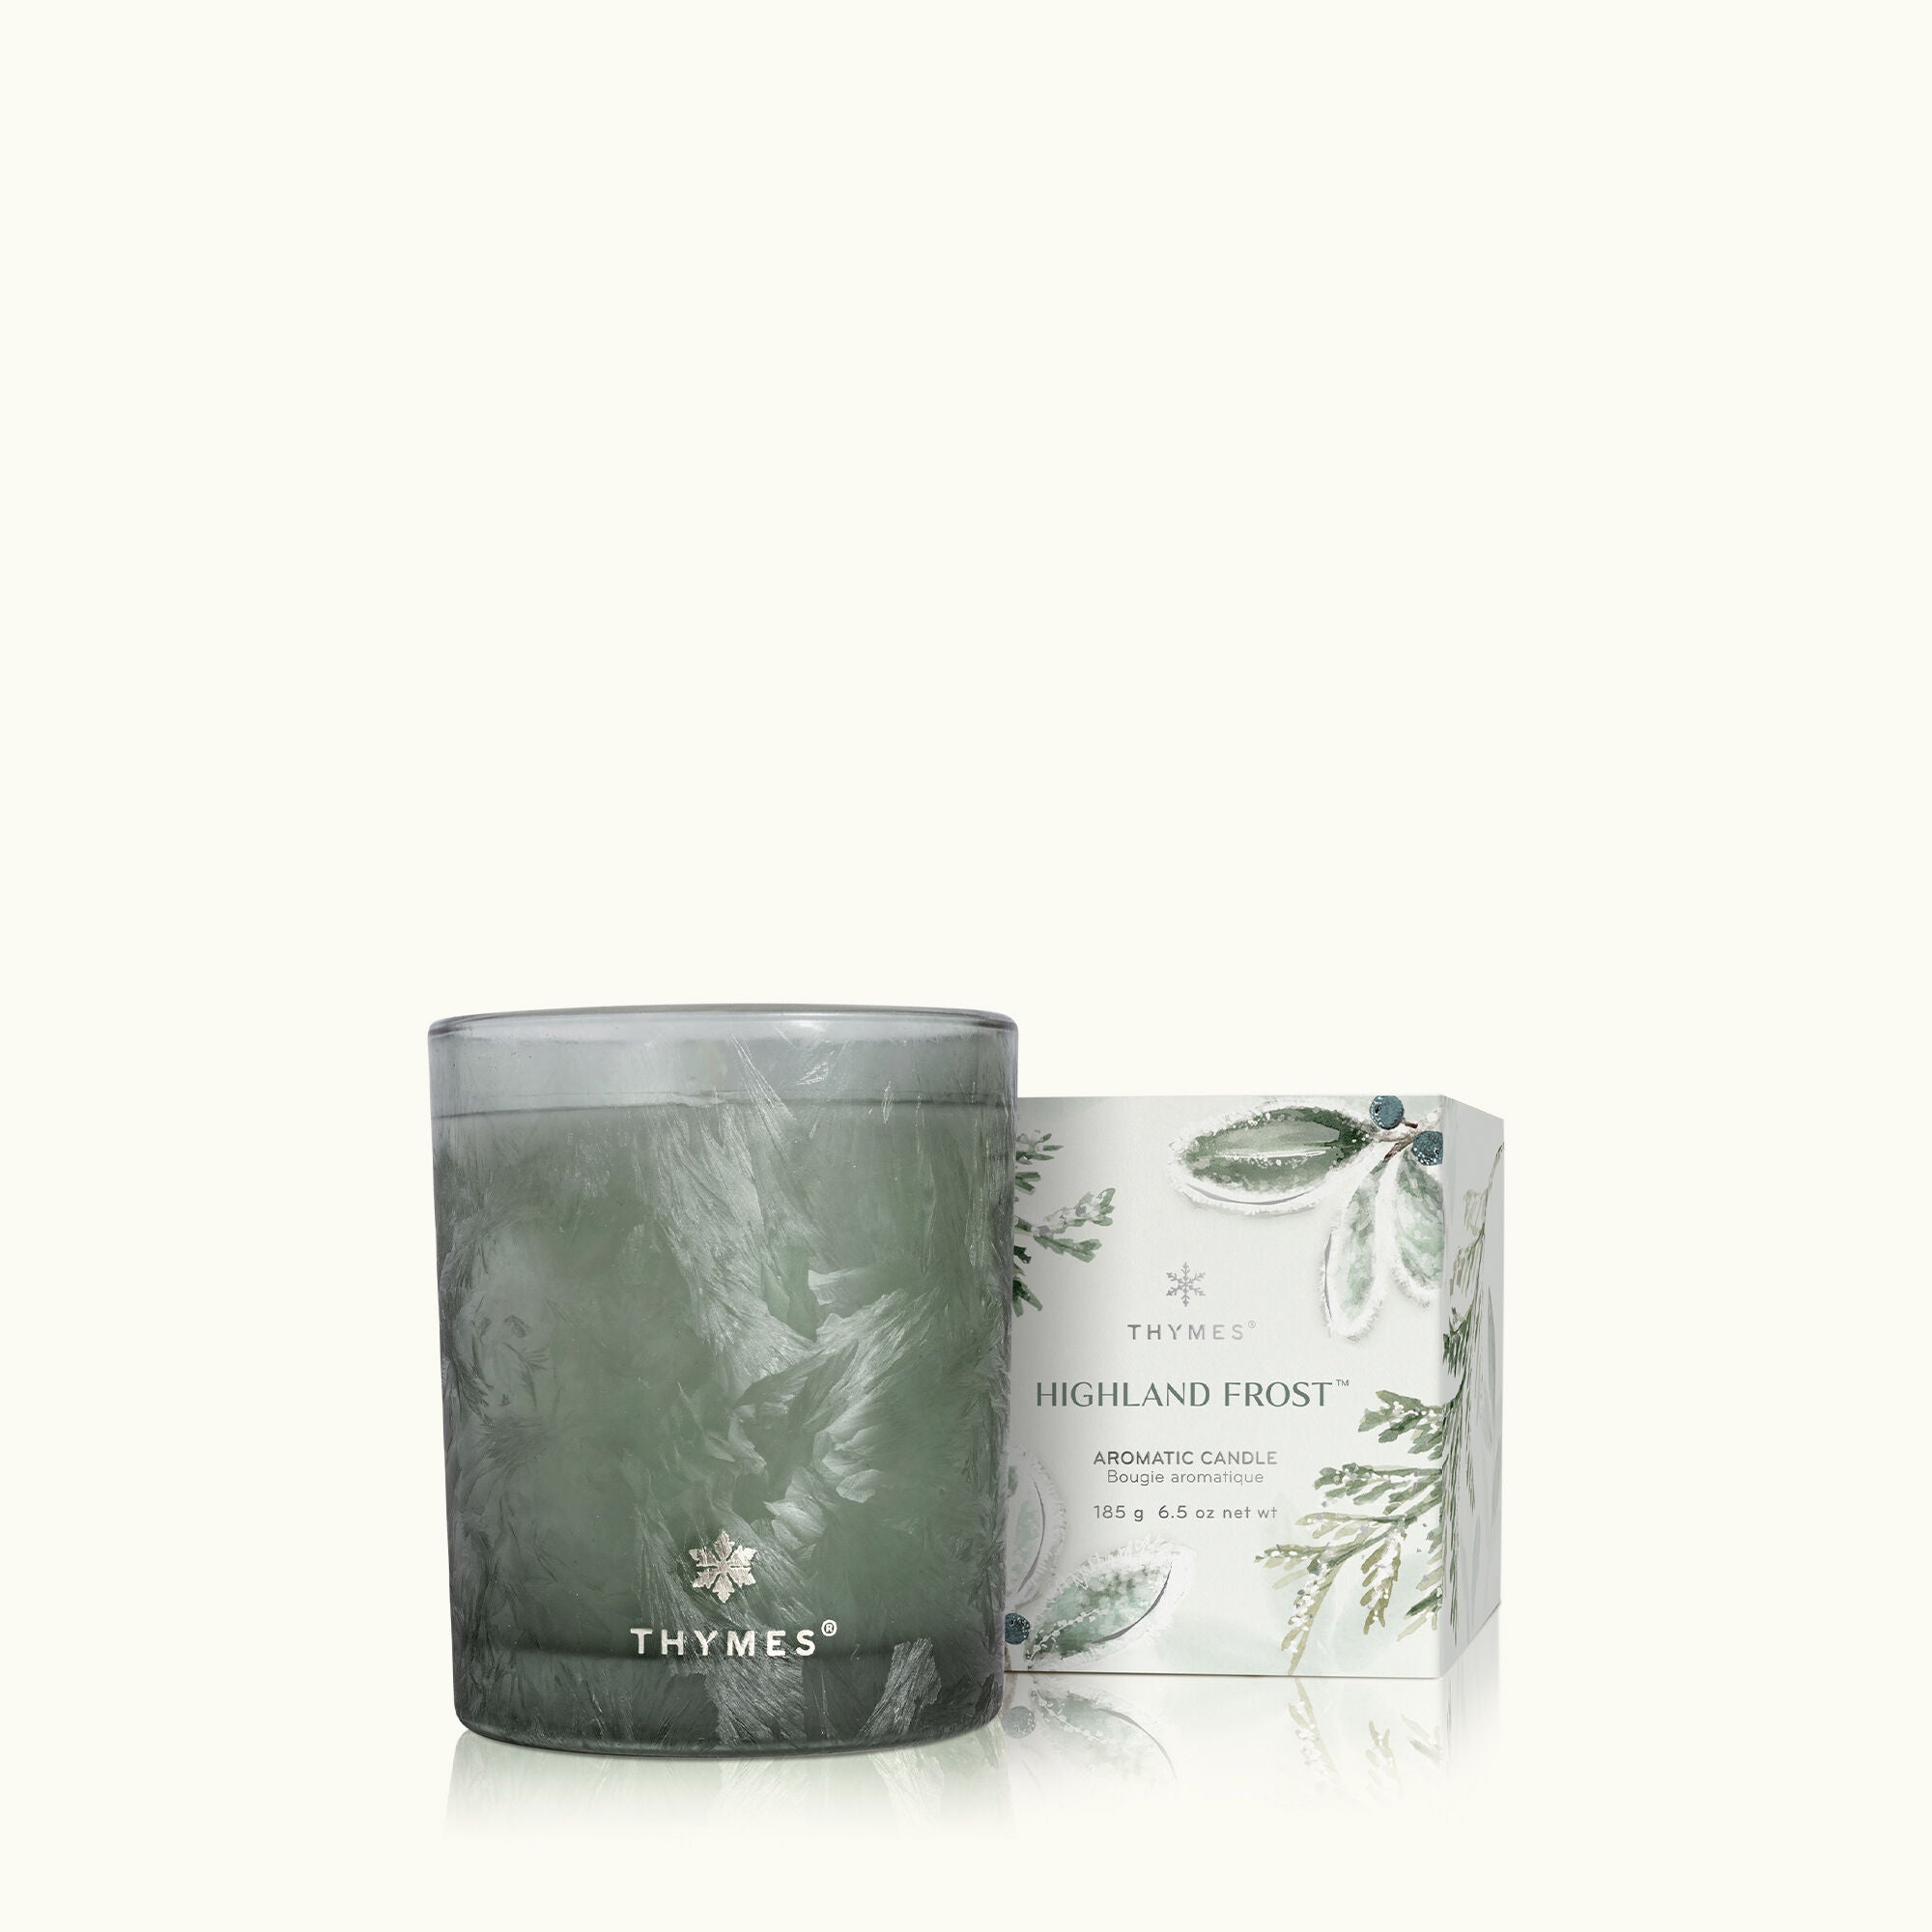 Thymes Highland Frost Boxed Candle, 6.5 oz – Smith's